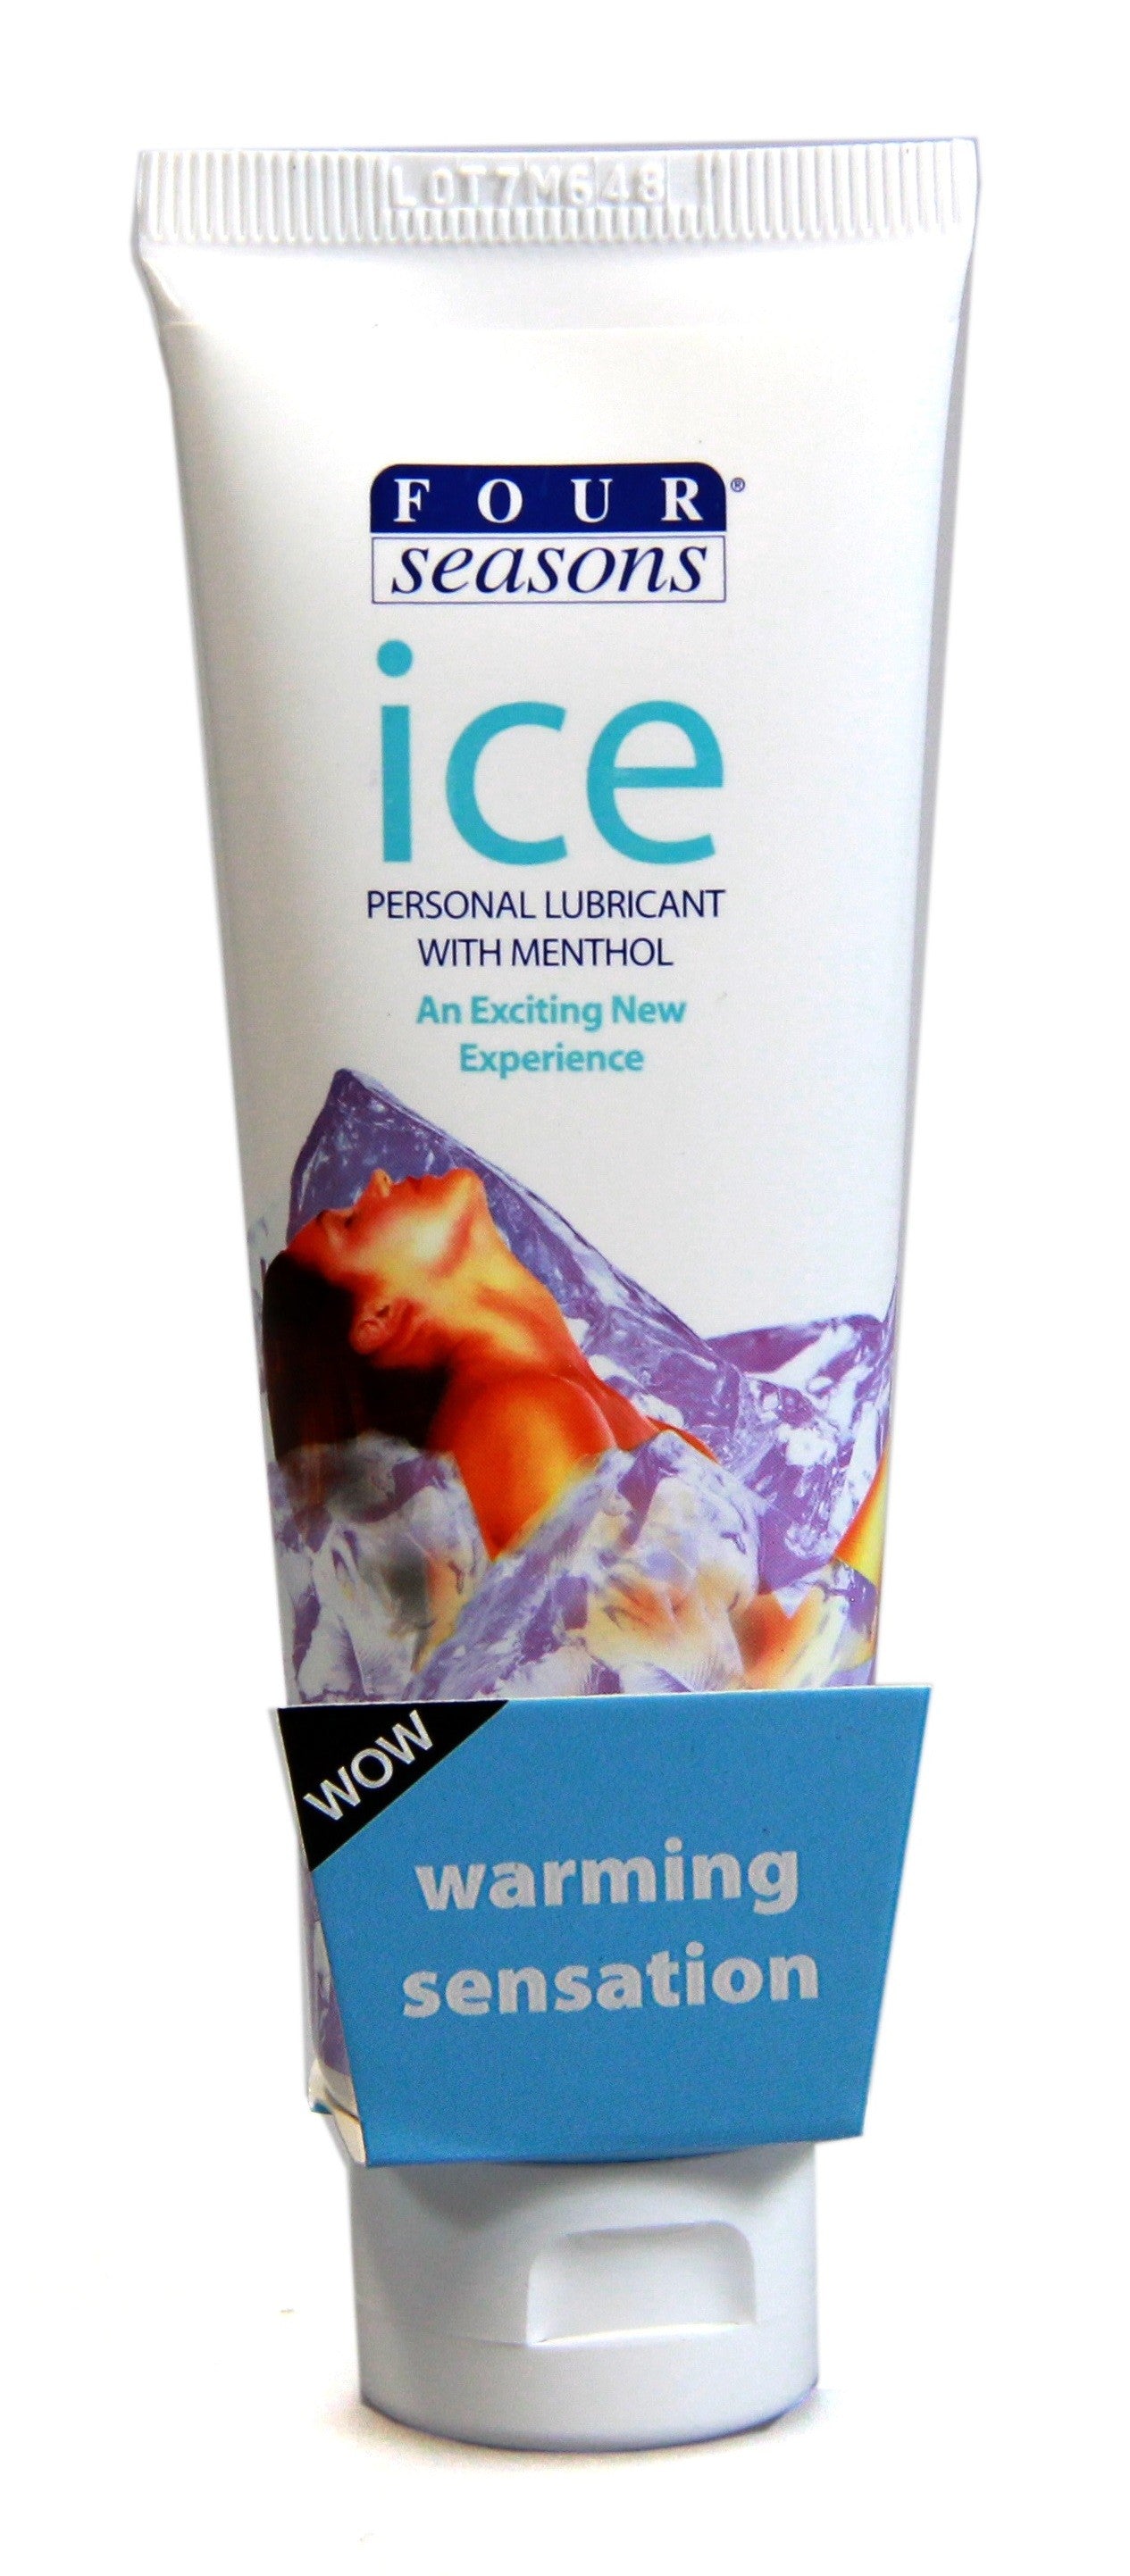  BUY Four Seasons | Four Seasons Ice Lubricant 100ml Duchess and Daisy Australia  Four Seasons Ice Lubricant is a specially formulated water based lubricant designed to greatly enhance arousal and sexual pleasure for both you and your partner. Four Seasons ICE lubricant is a clear natural feeling gel offering an exciting sensation that increases with body heat and feels like ice.